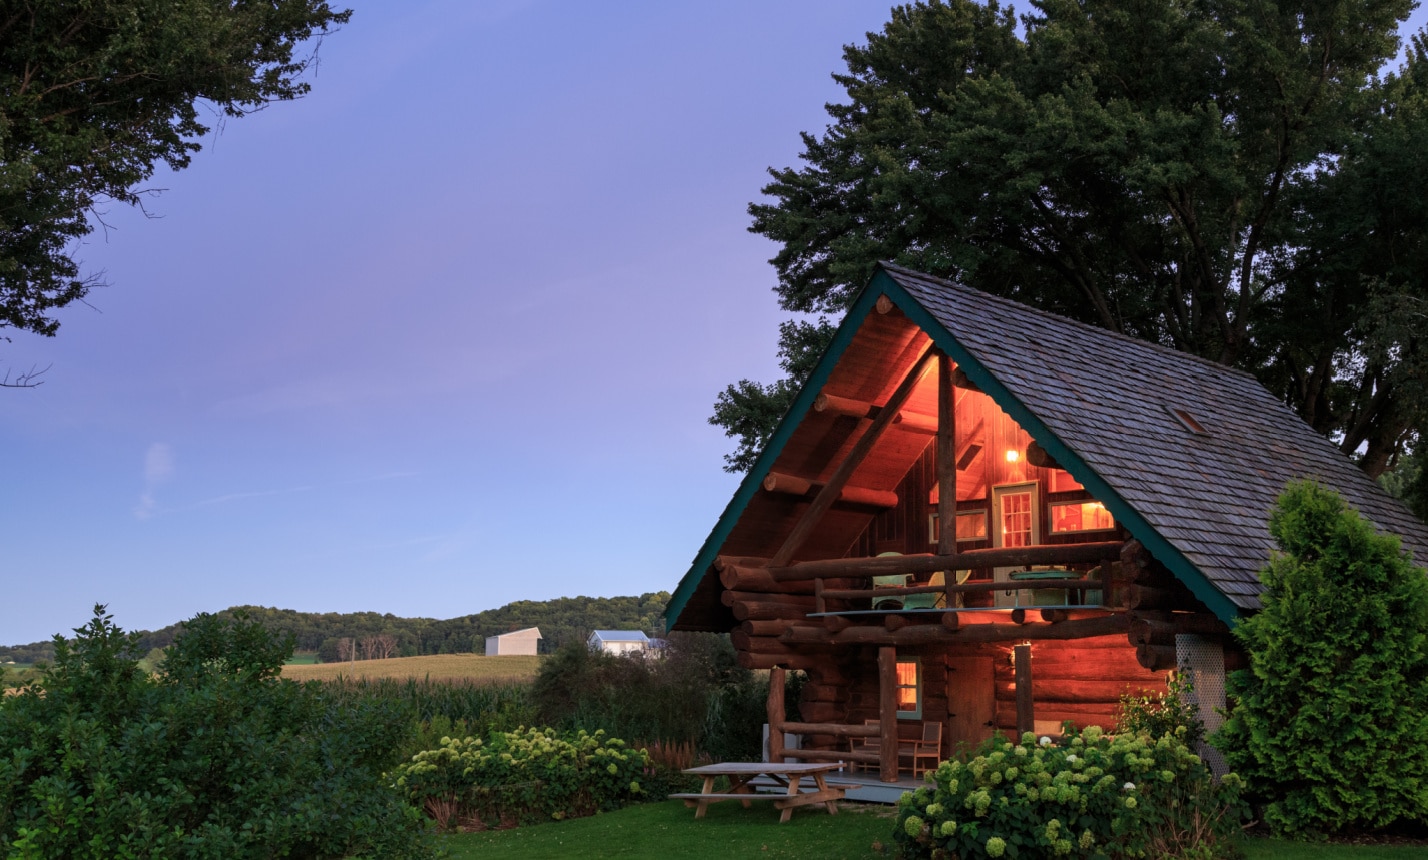 The spacious grounds of our Wisconsin Bed and Breakfast offers cabins in Wisconsin that make for the perfect romantic getaway.